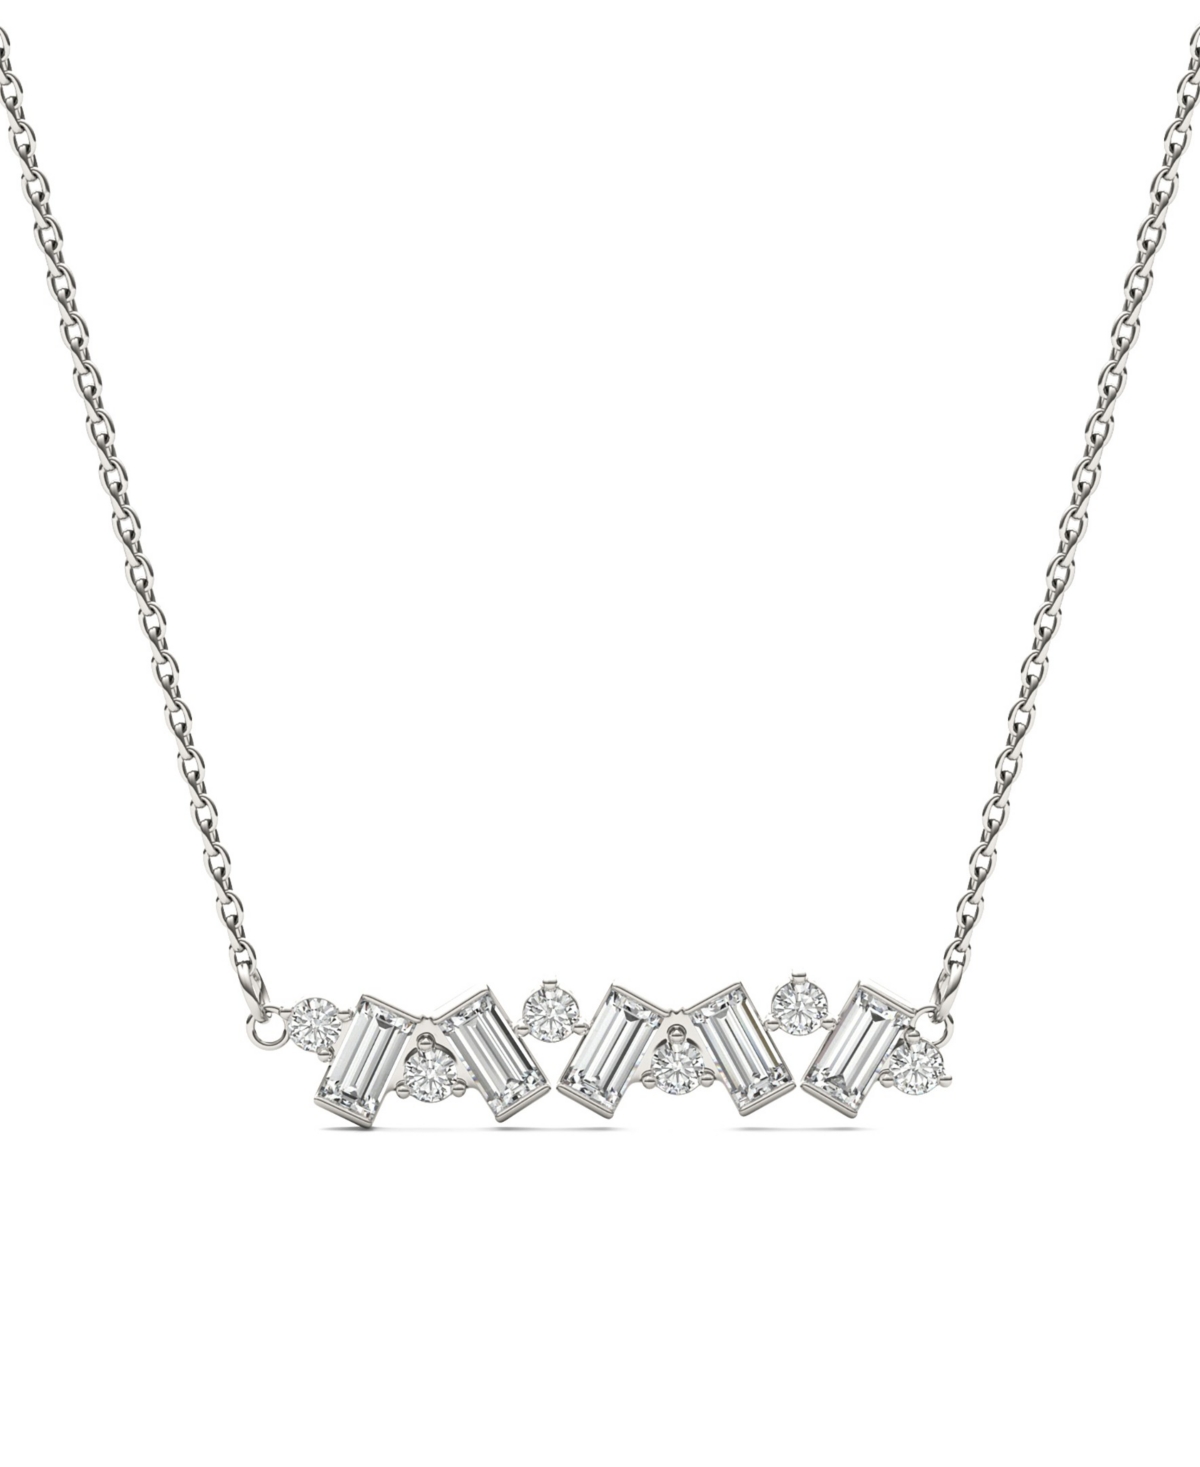 Shop Charles & Colvard Moissanite Fixed Baguette Necklace (3/4 Carat Total Weight Certified Diamond Equivalent) In 14k Whit In White Gold